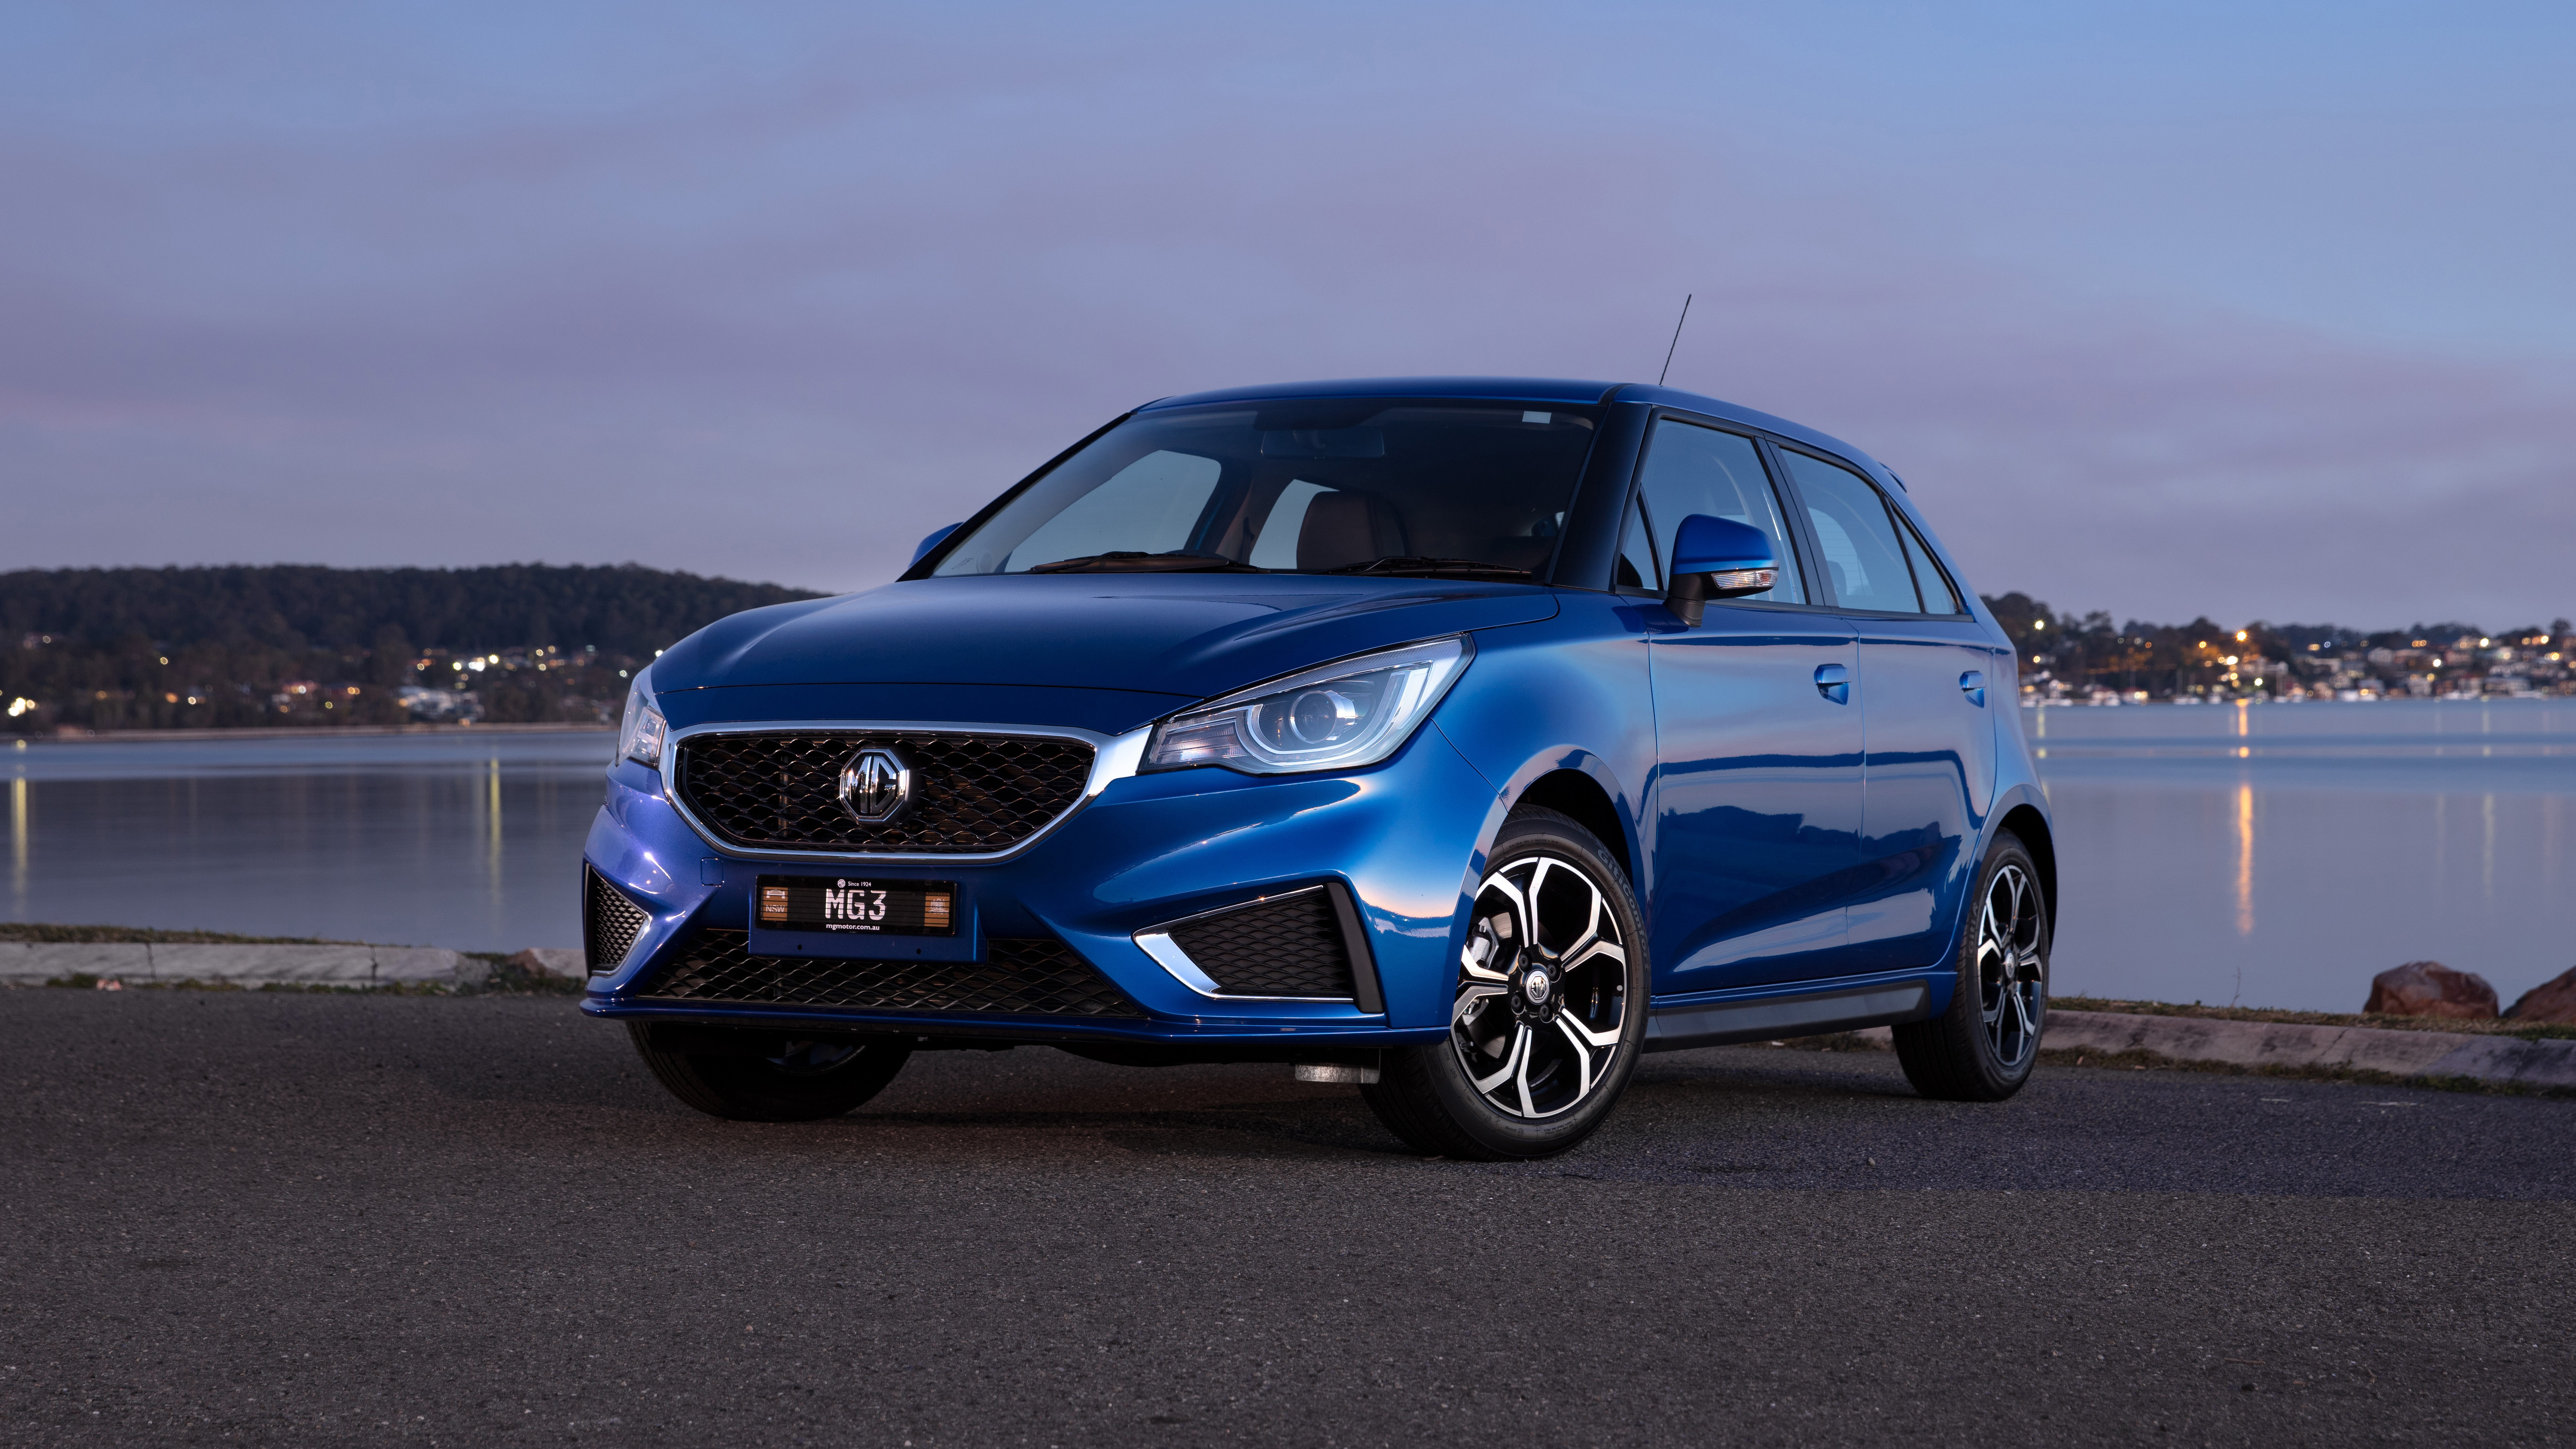 2019 Mg 3 Pricing And Specs Caradvice